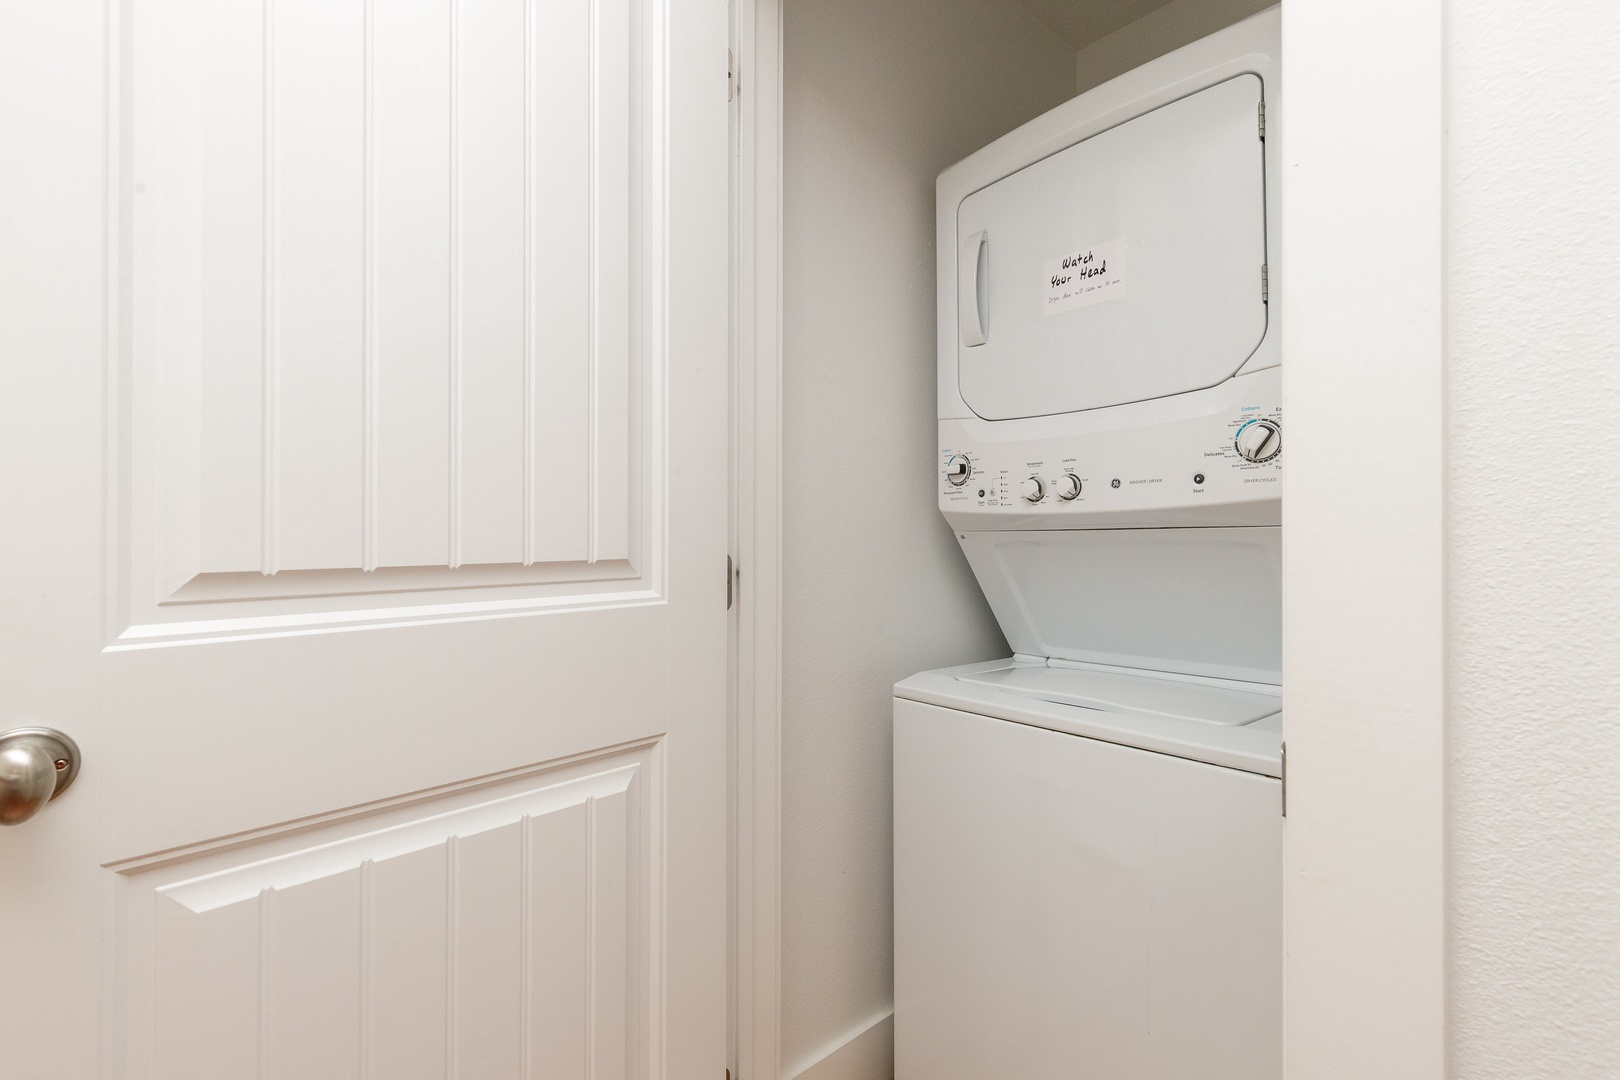 Private laundry is available for your stay, located in a 2nd floor closet